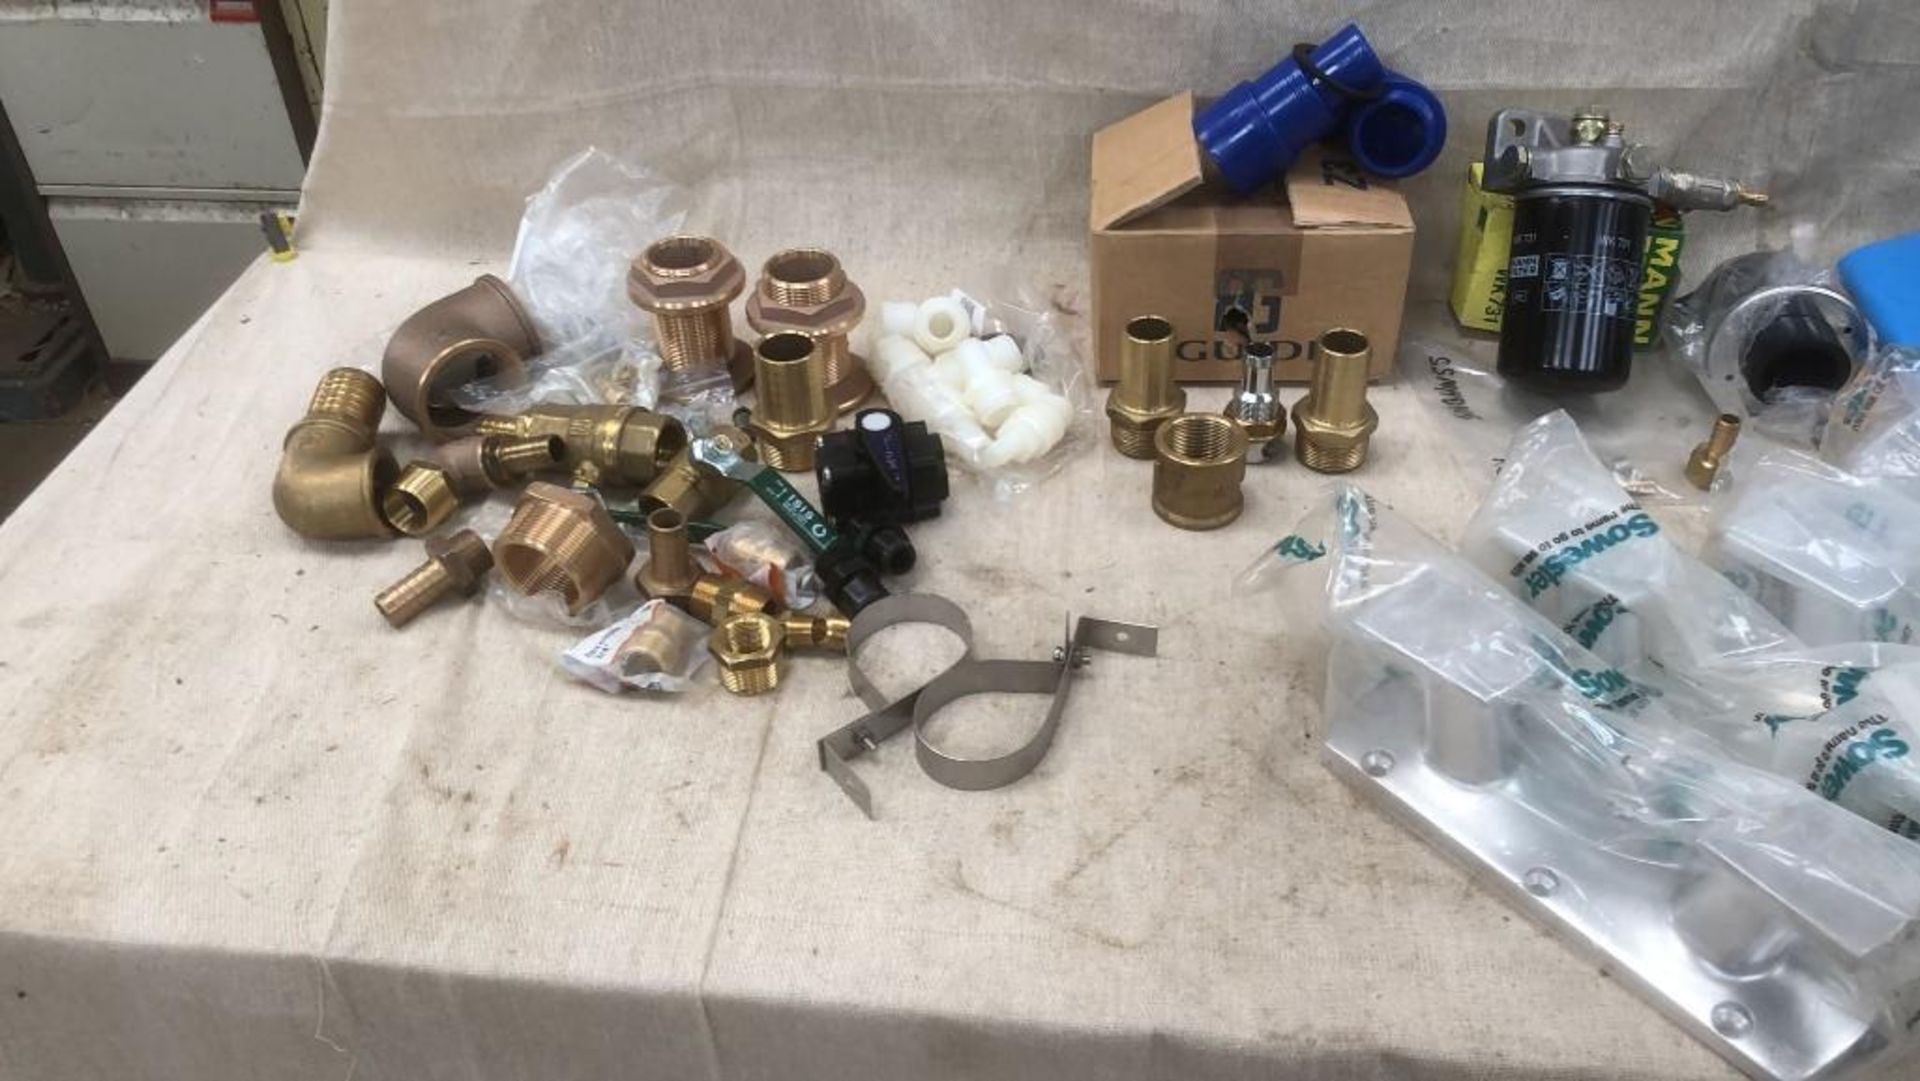 Selection of Bronze, Fuel and Deck Fittings and Flexible Water Tank - (Norfolk)